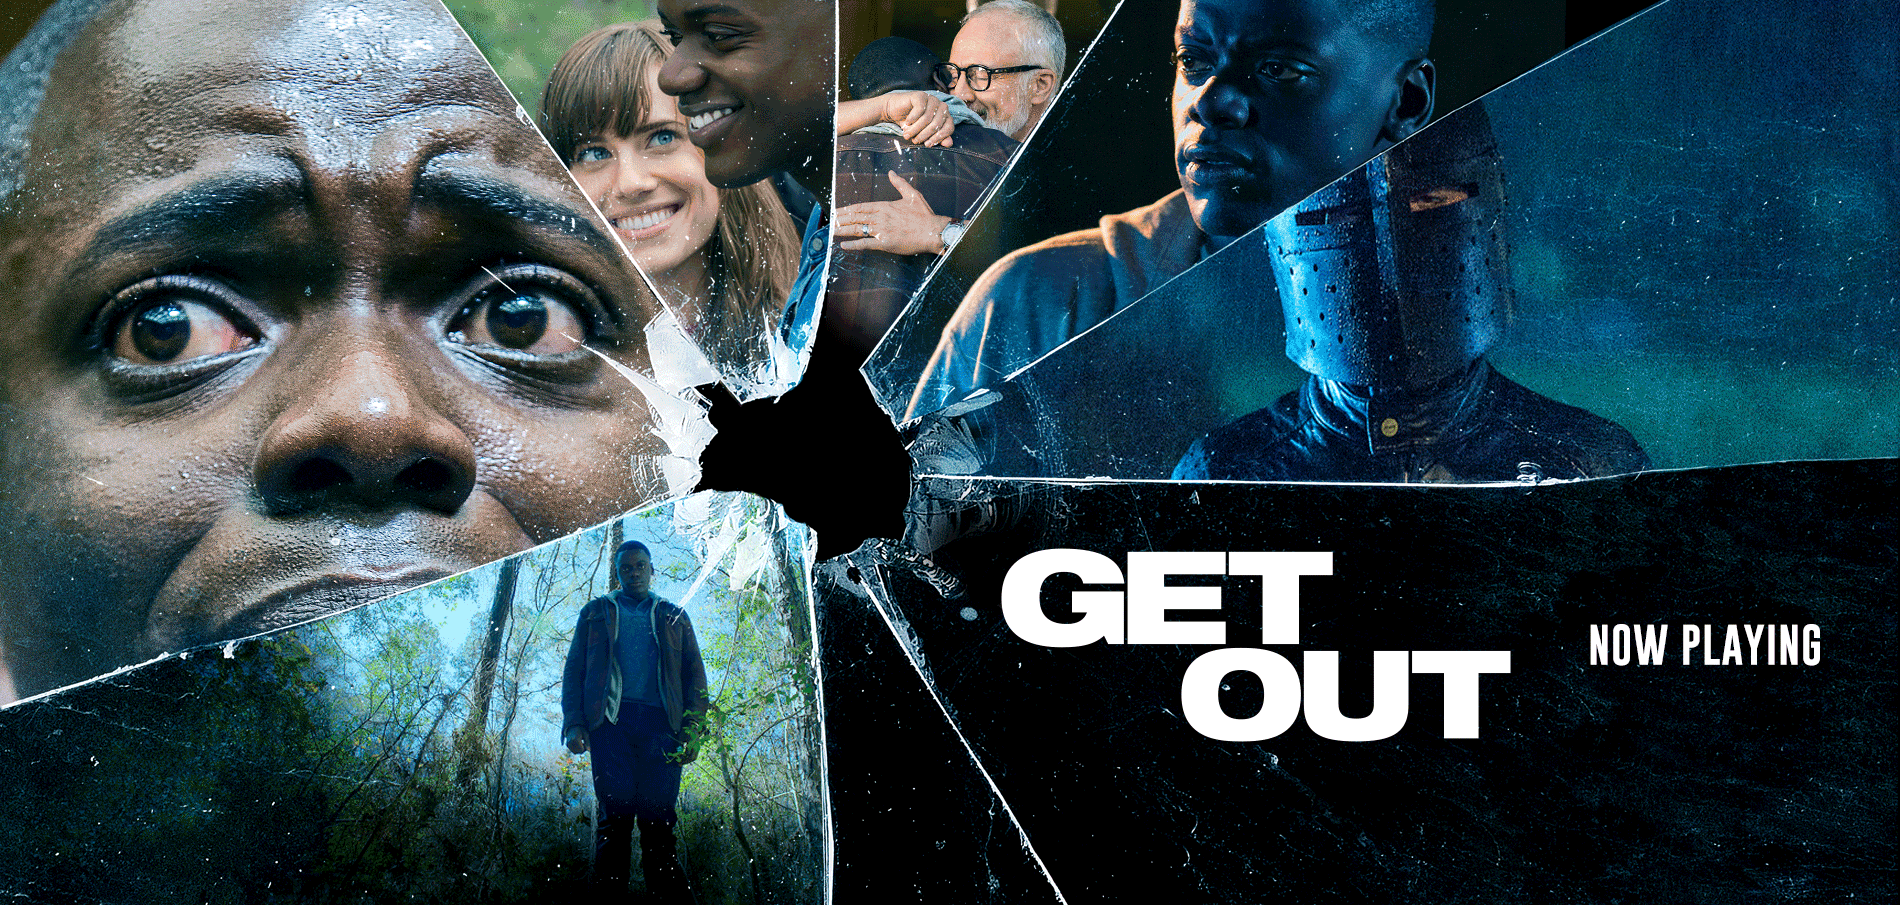 Go see Get Out Immediately - That's Normal